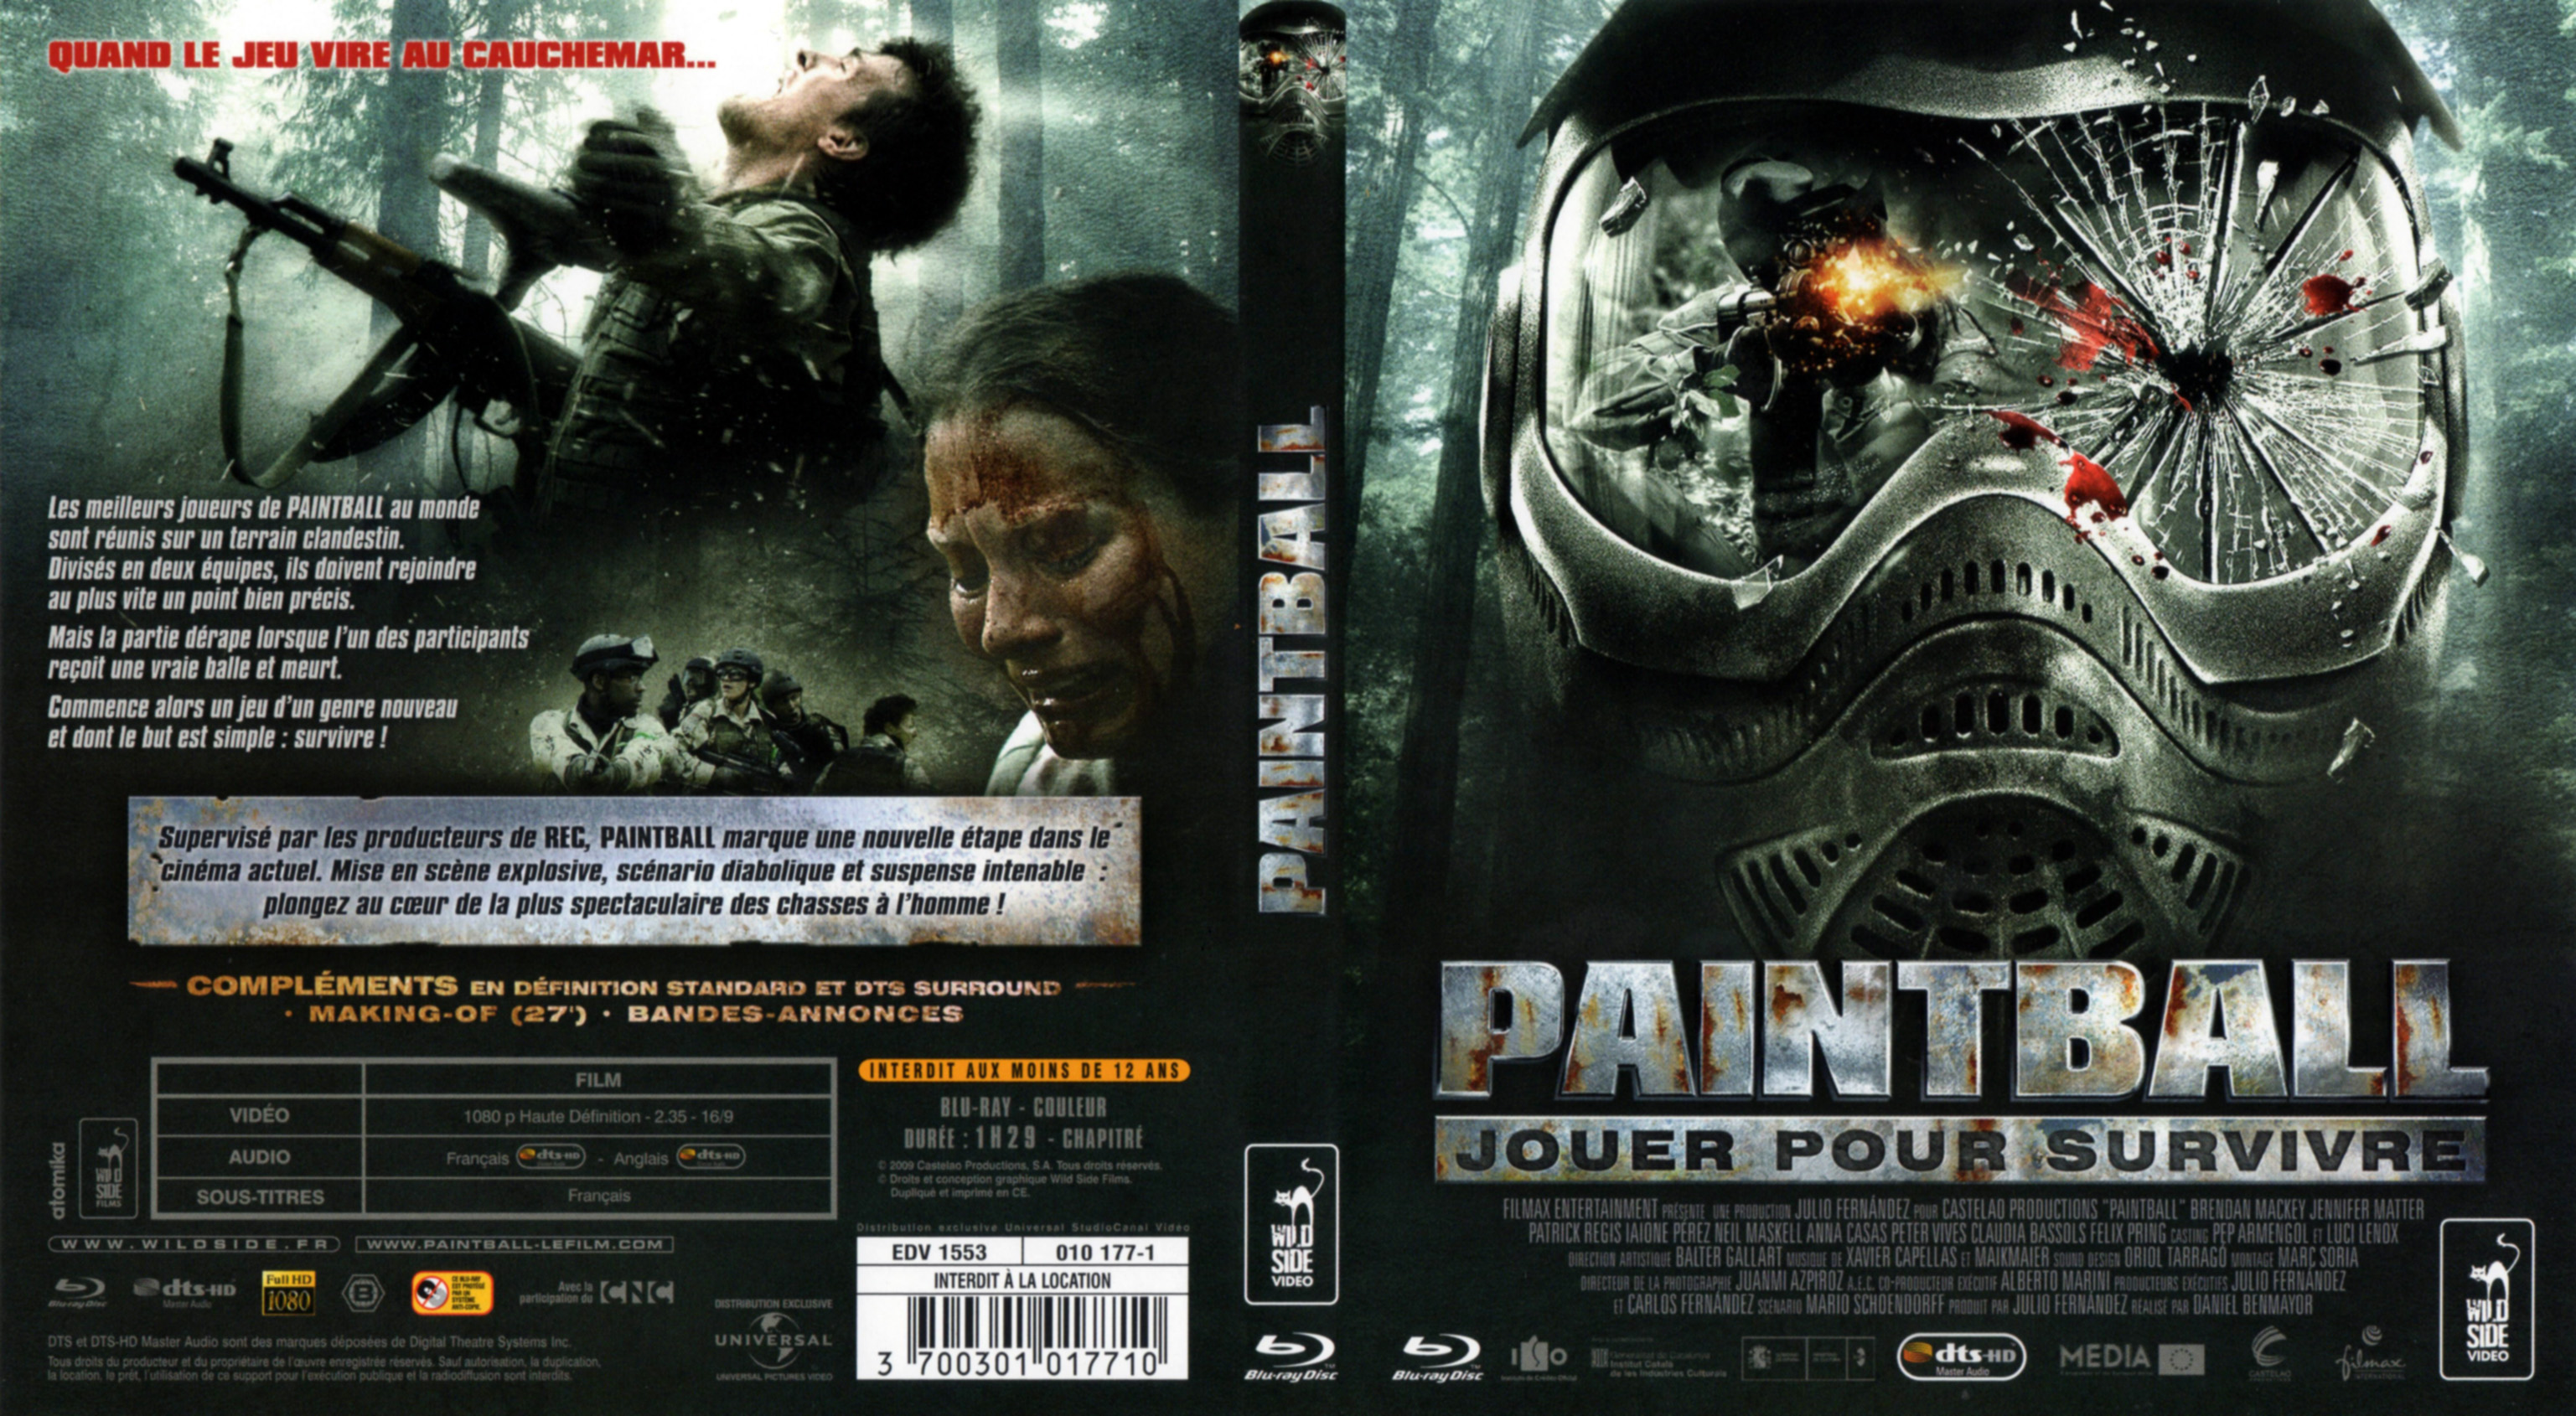 Jaquette DVD Paintball (BLU-RAY)